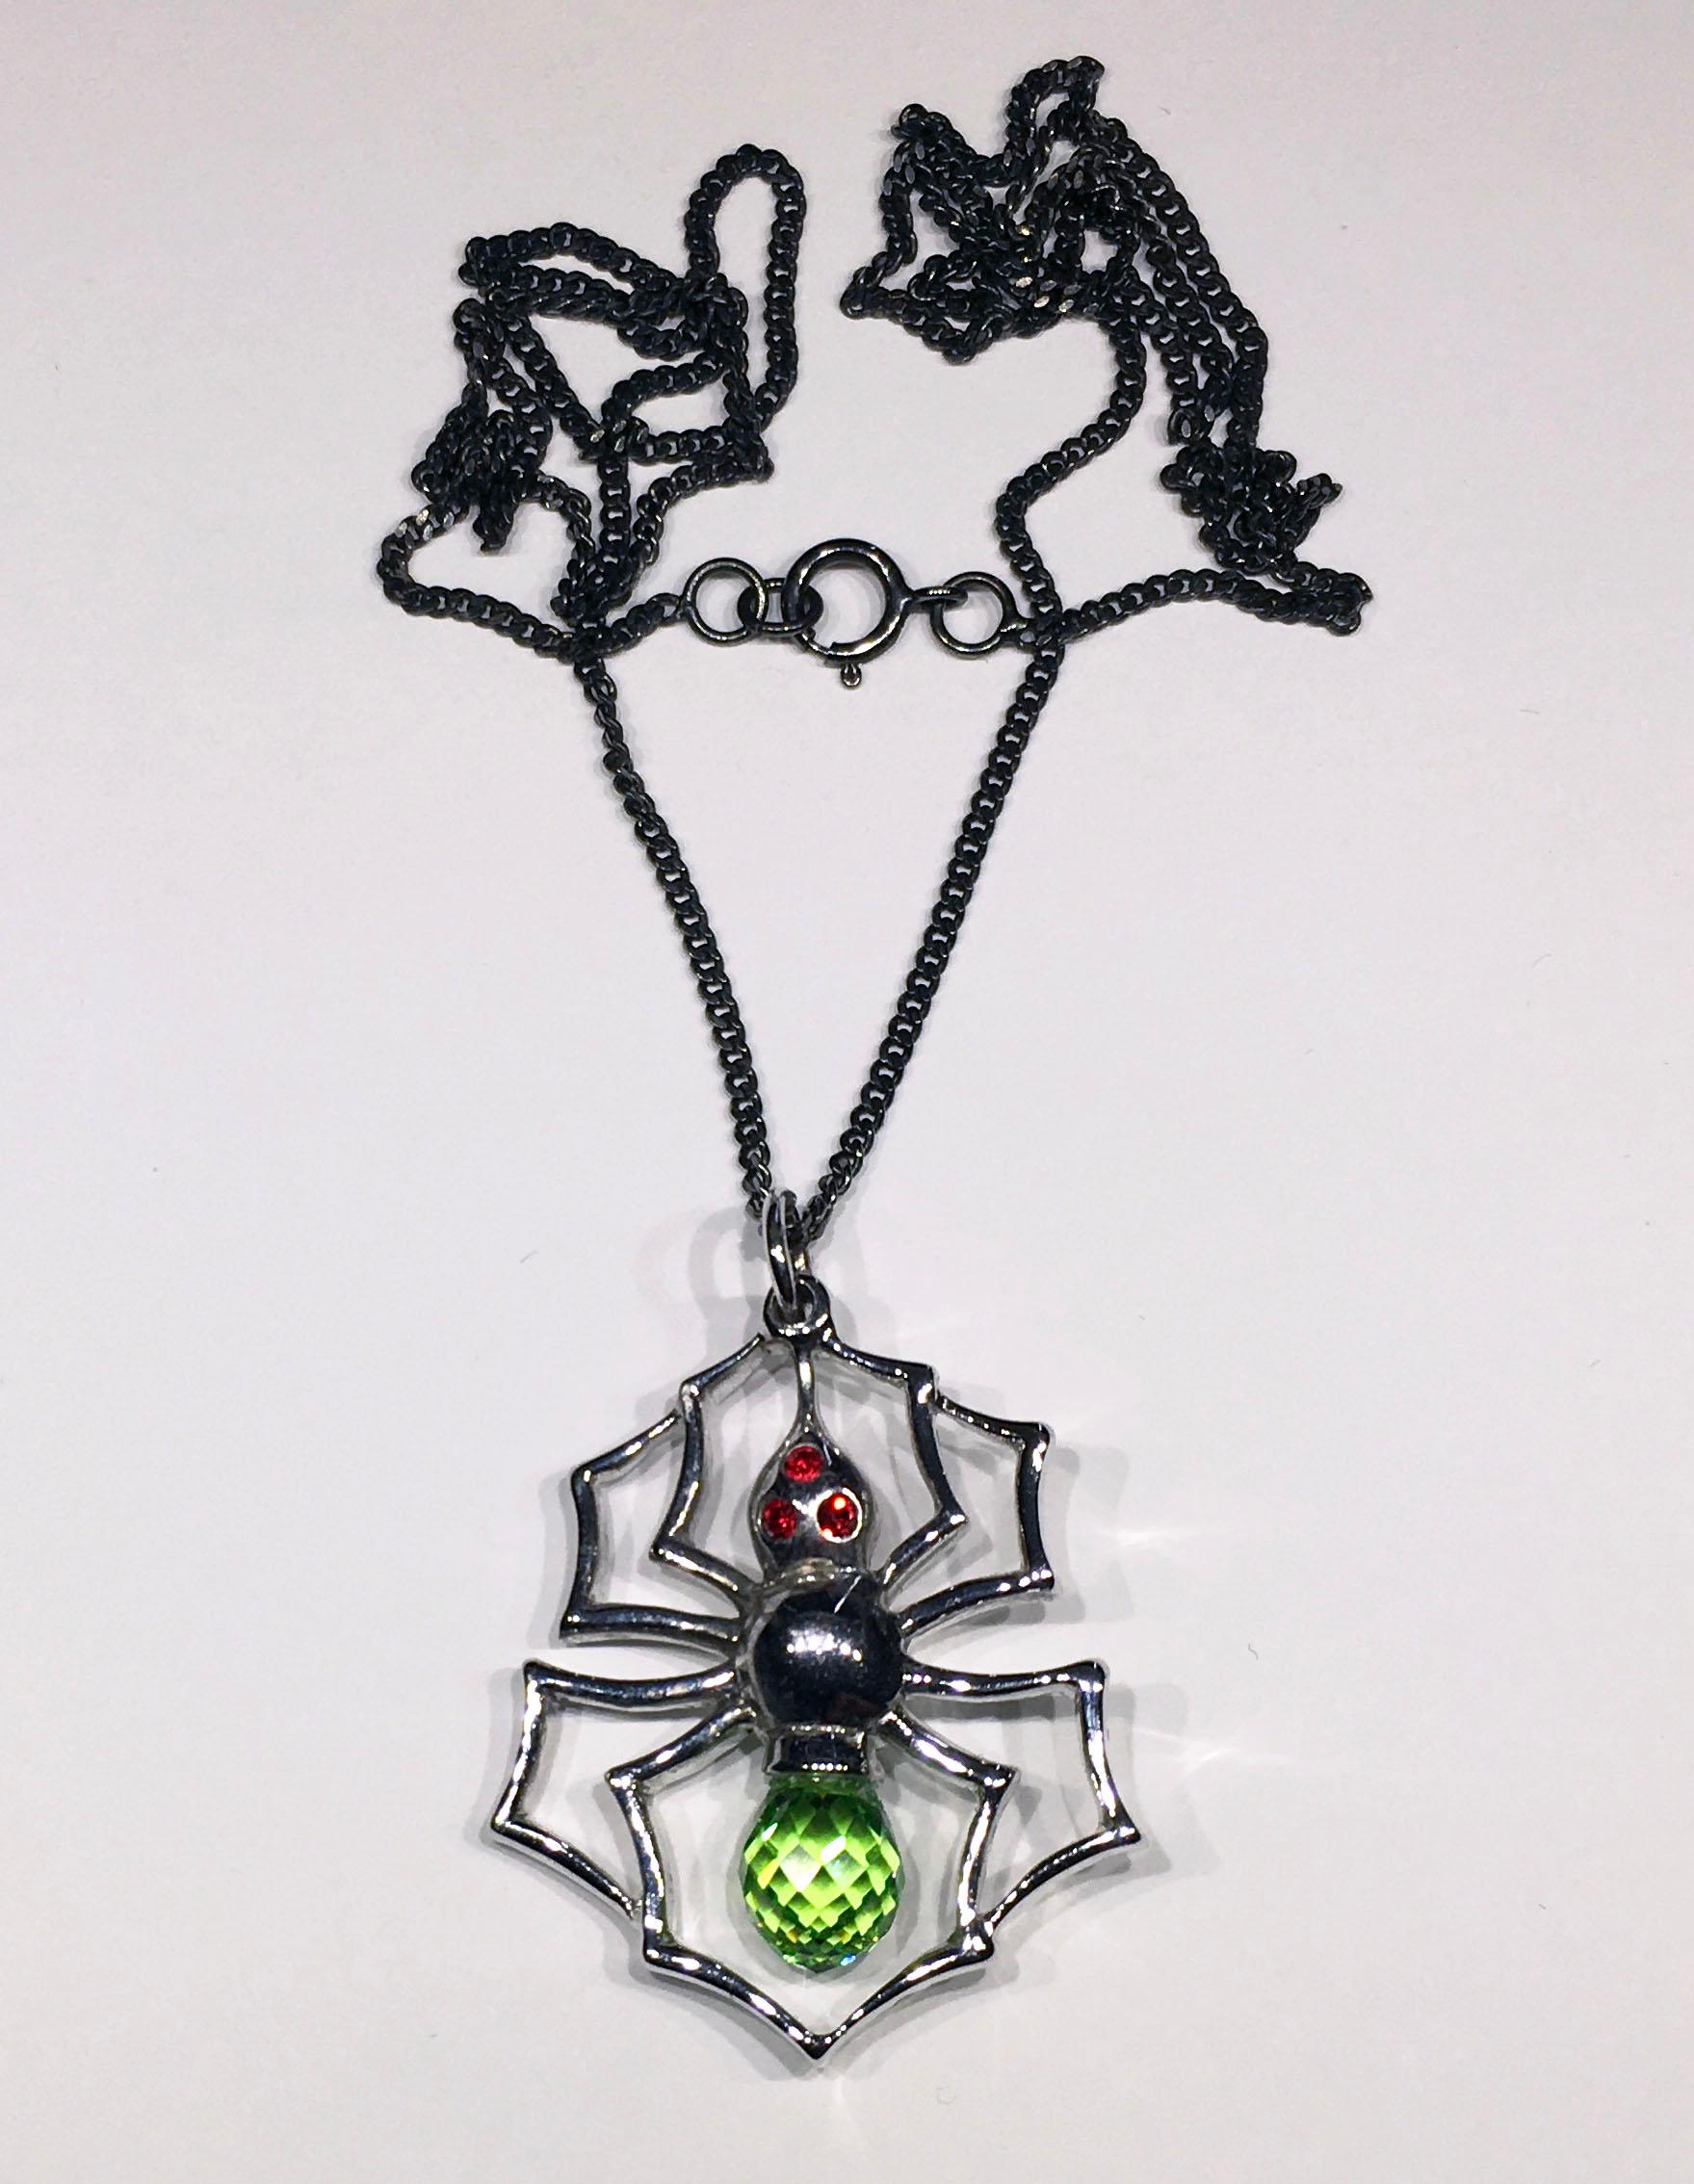 Kary Adam Designed, A Blackened Silver Spider Pendant with Cultured Green Sapphire Body, & Red Zirconia Eyes. This Pendant is hung from a Blackened Silver Chain of 20